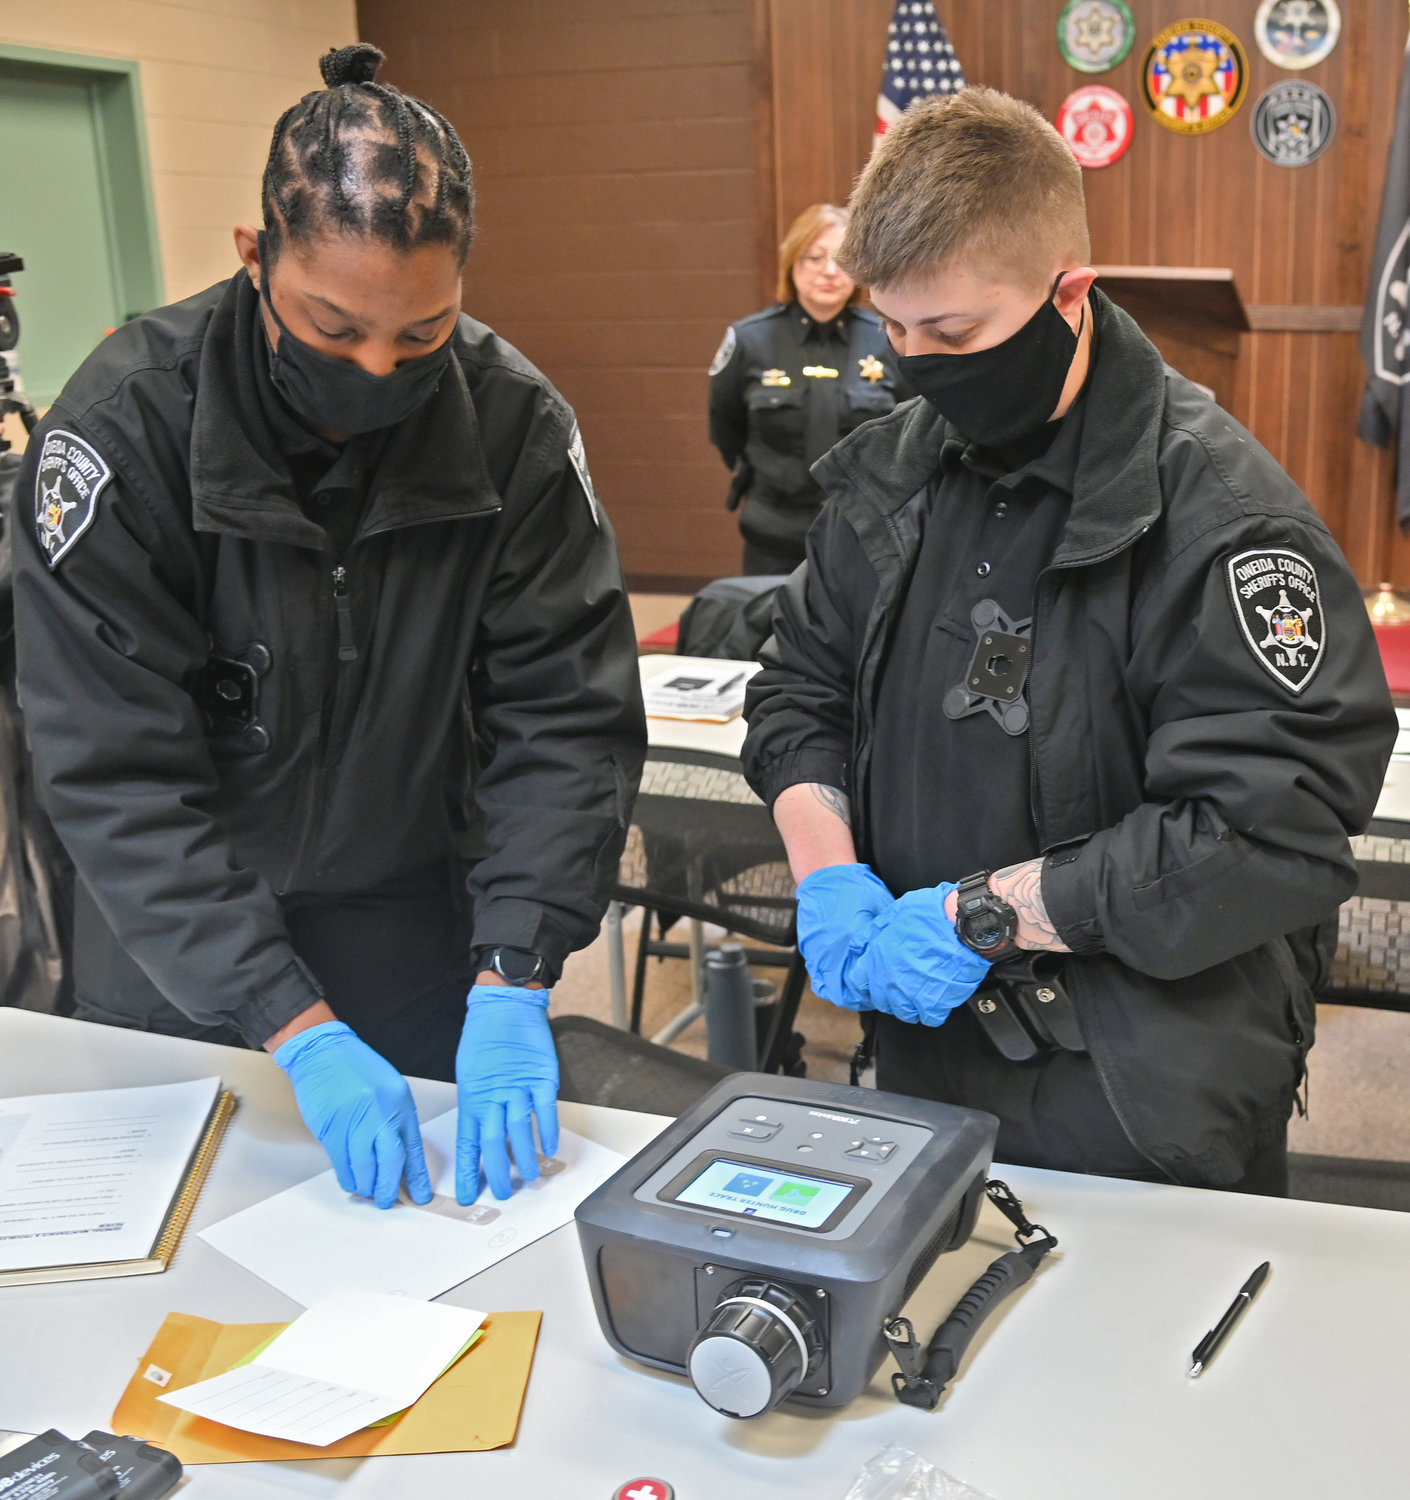 HANDS ON TESTING — Corrections Officer Leslie and Officer DiFederico demonstrate the new MX908 drug detection device purchased for the Oneida County Jail.